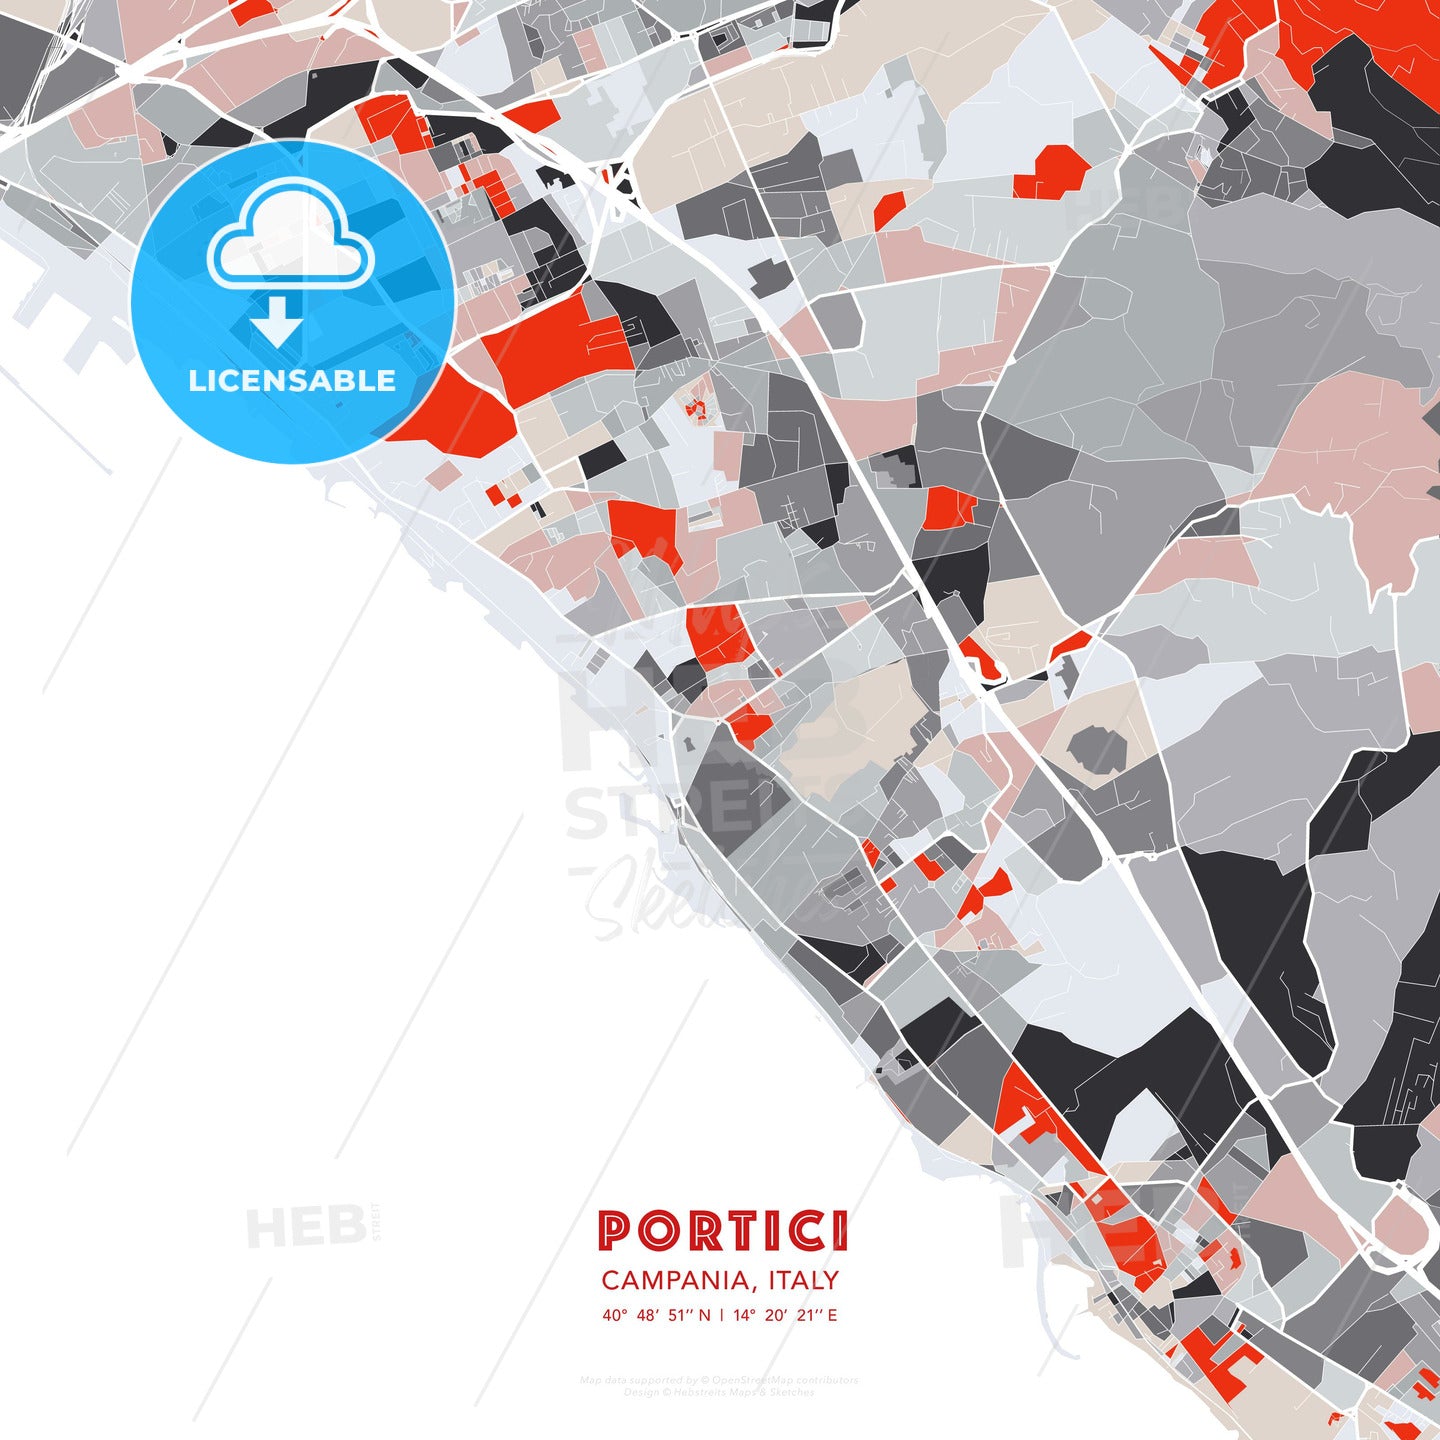 Portici, Campania, Italy, modern map - HEBSTREITS Sketches